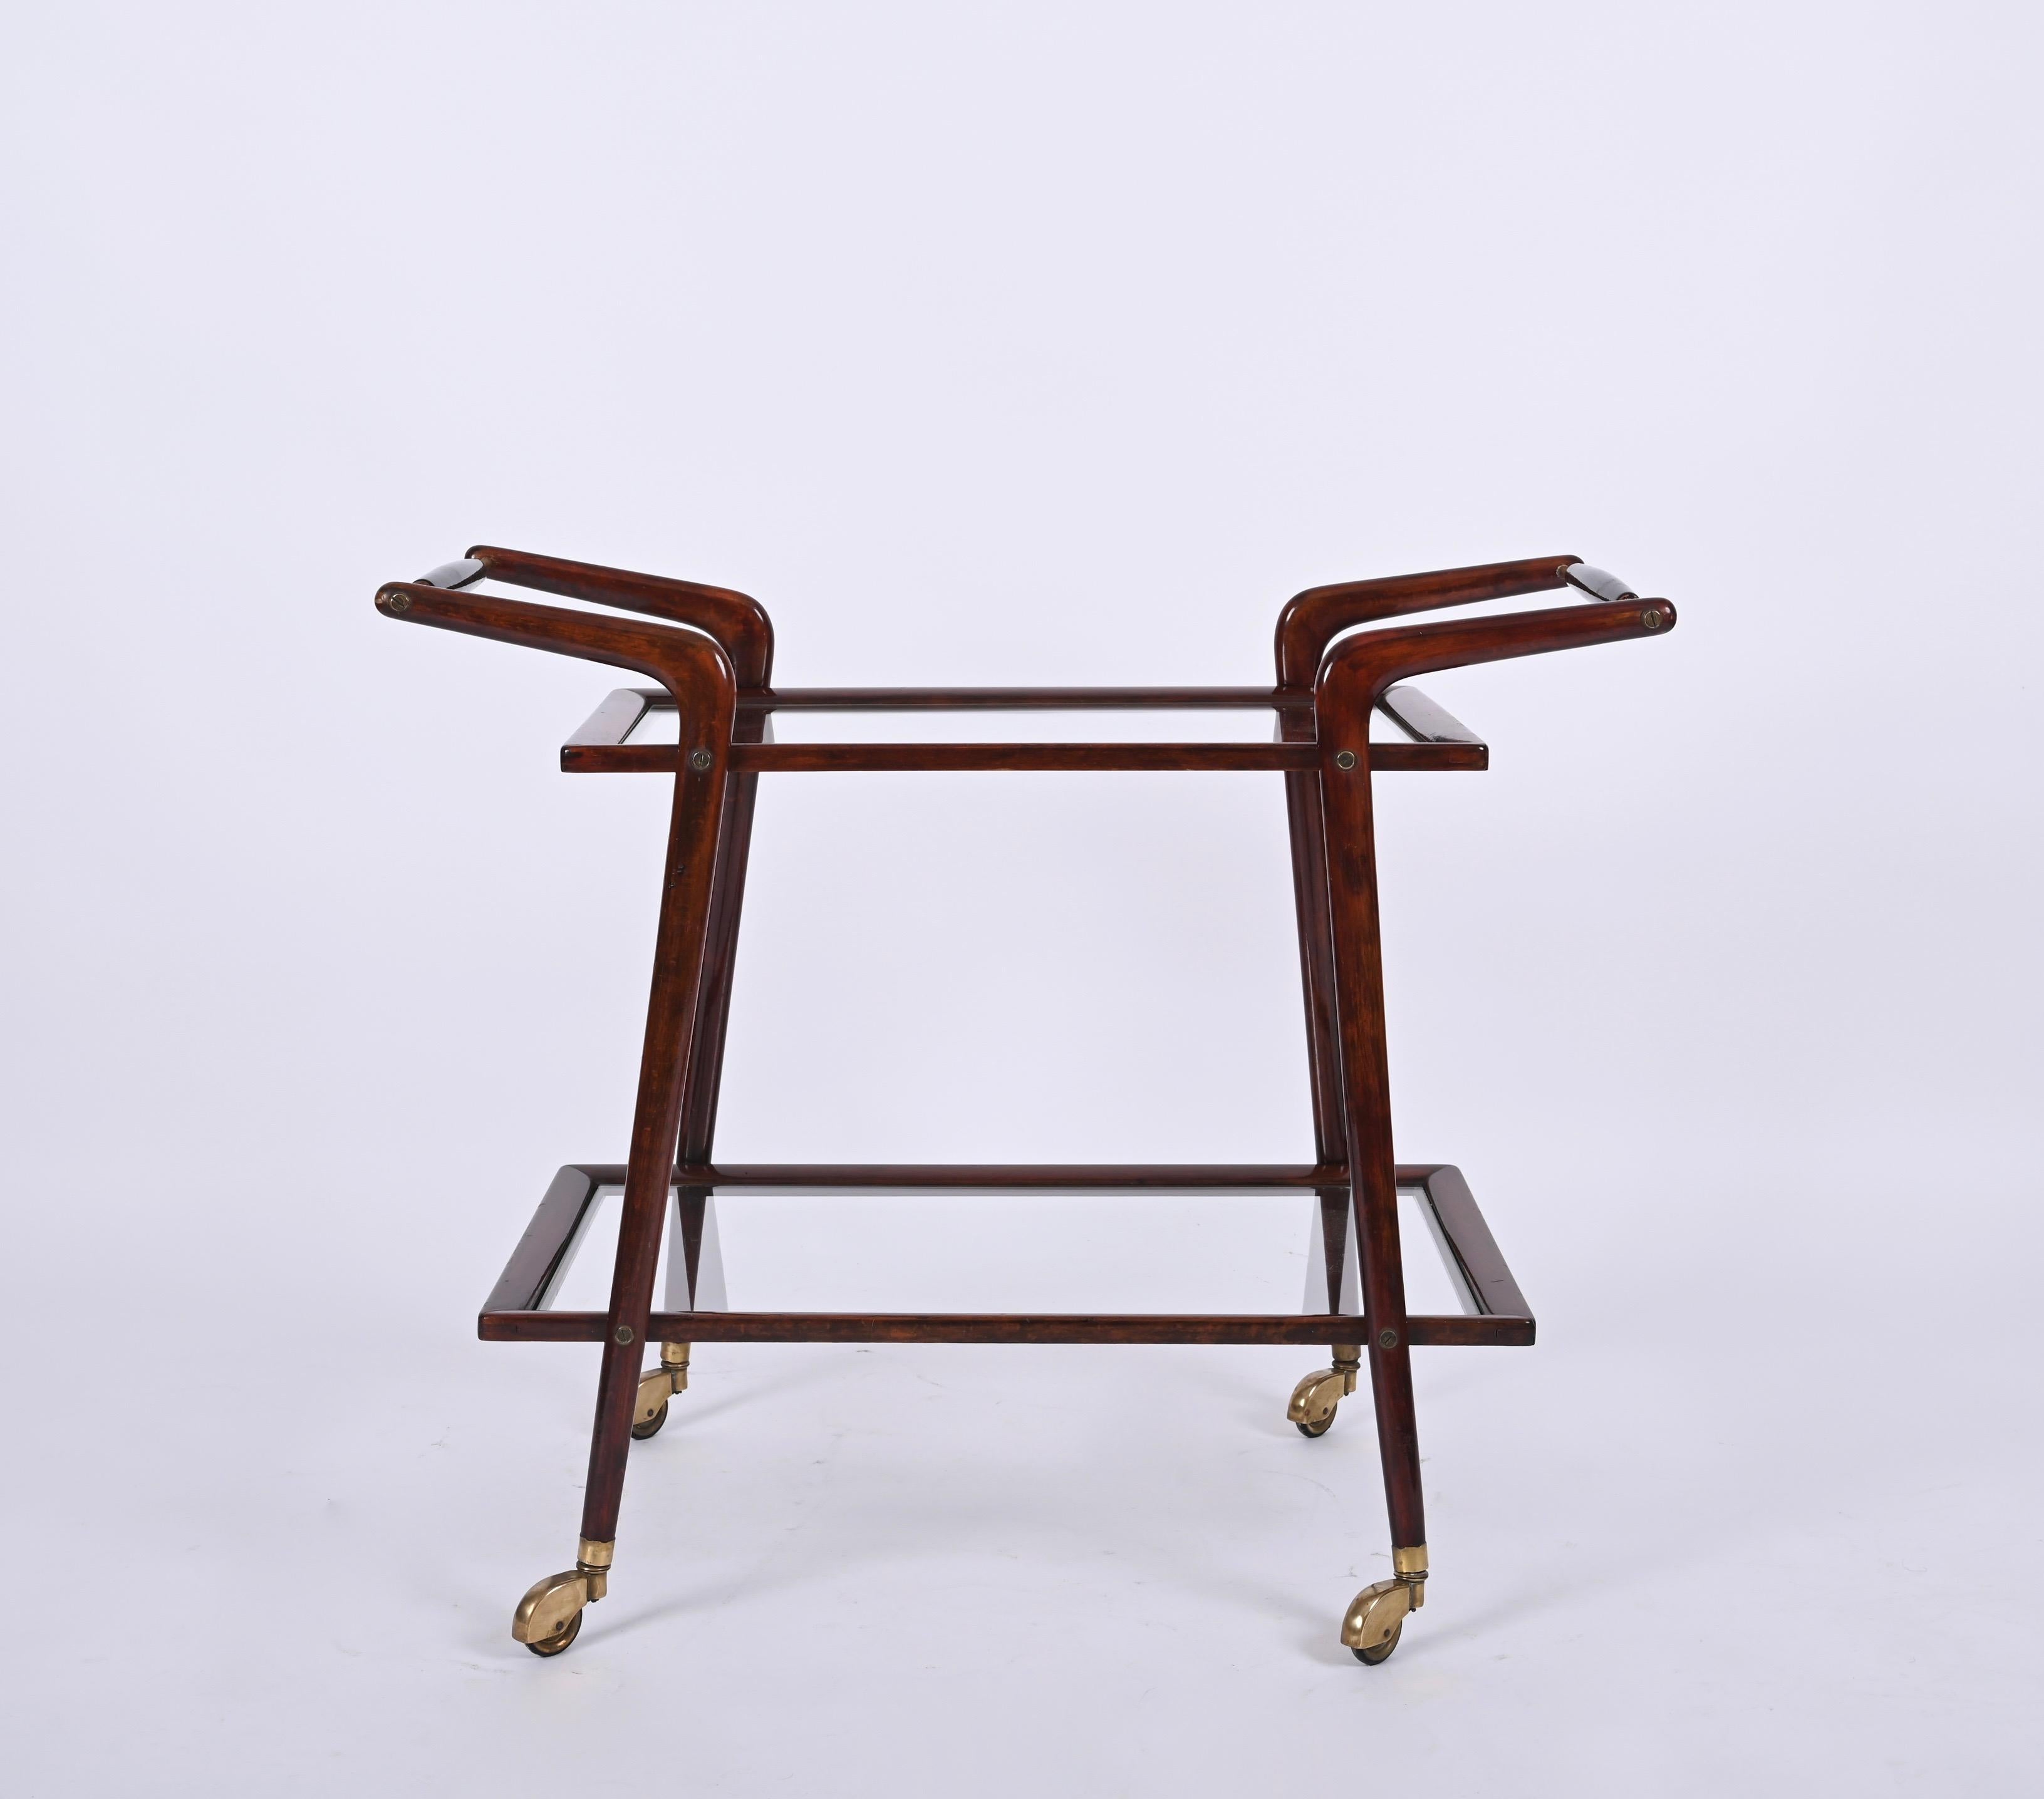 Marvellous Italian bar trolley designed by Cesare Lacca in the 1950s in Italy. 

The bar cart features a gorgeous symmetrical design with the two original crystal glass shelves, stunning curved legs and two handles in brass and black lacquered